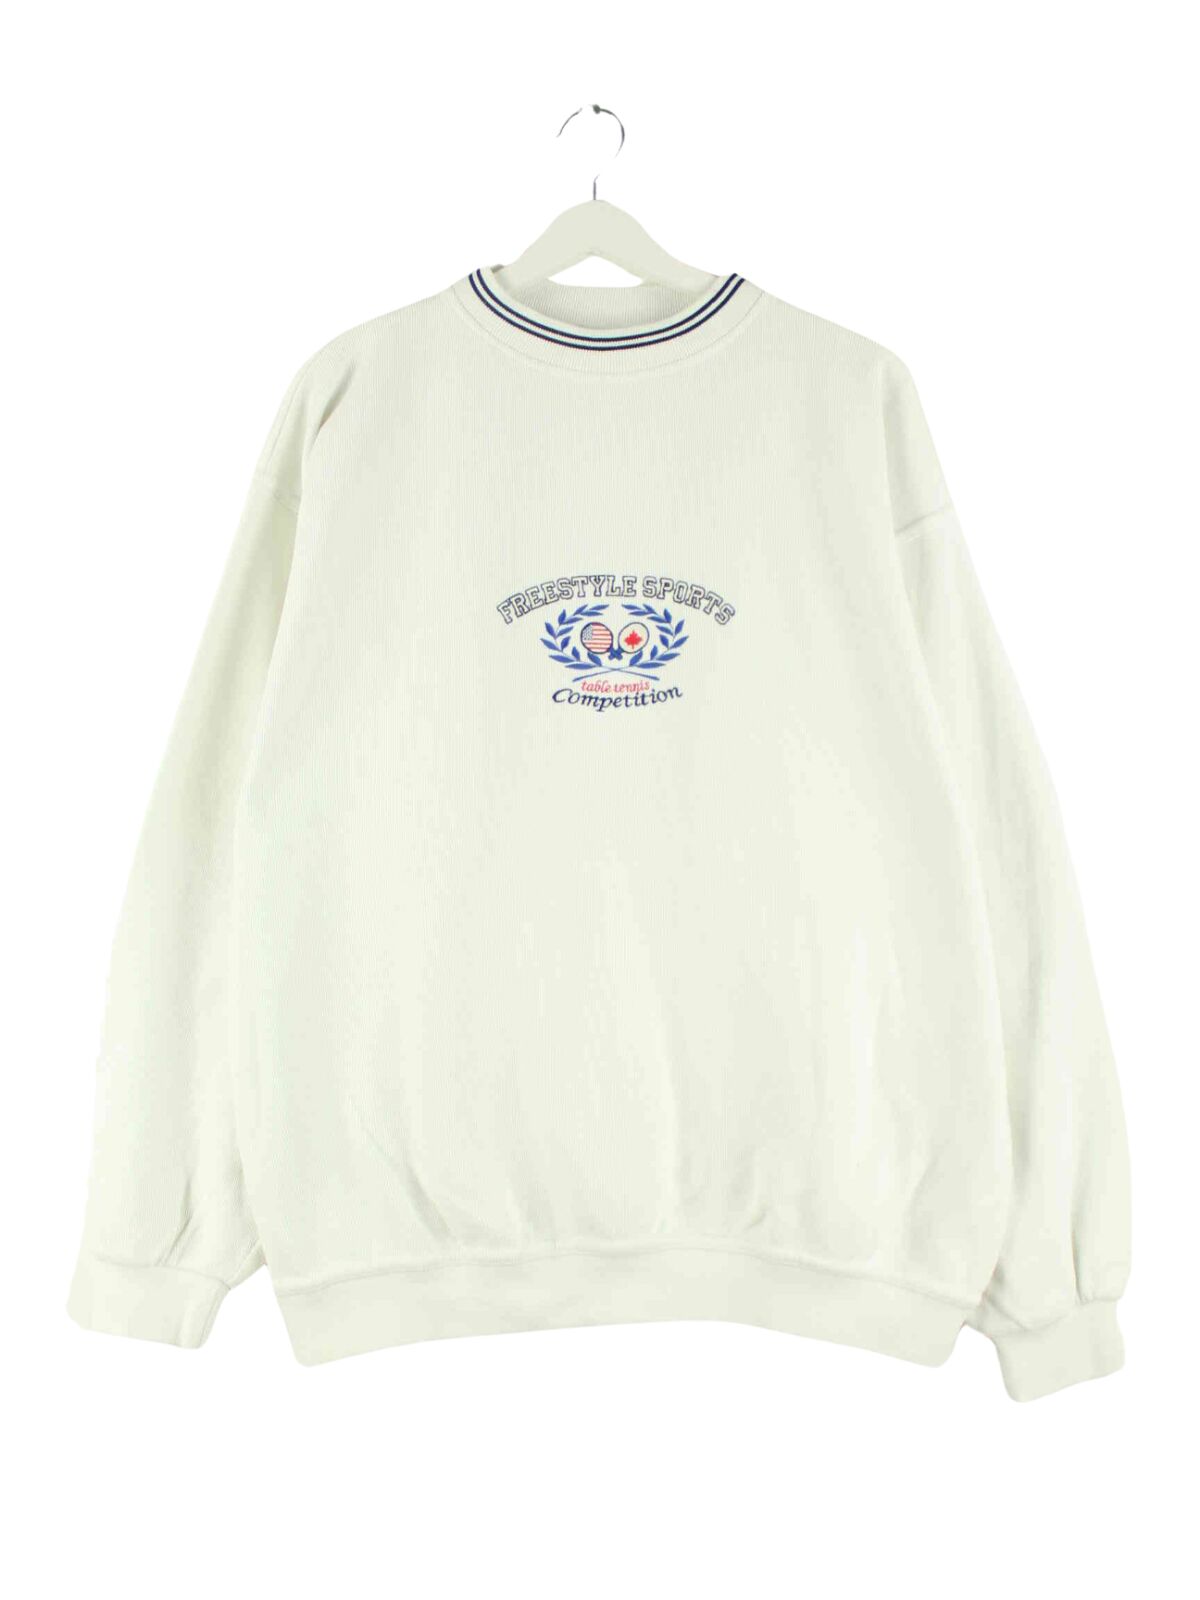 Vintage 90s Table Tennis Embroidered Sweater Weiß L (front image)